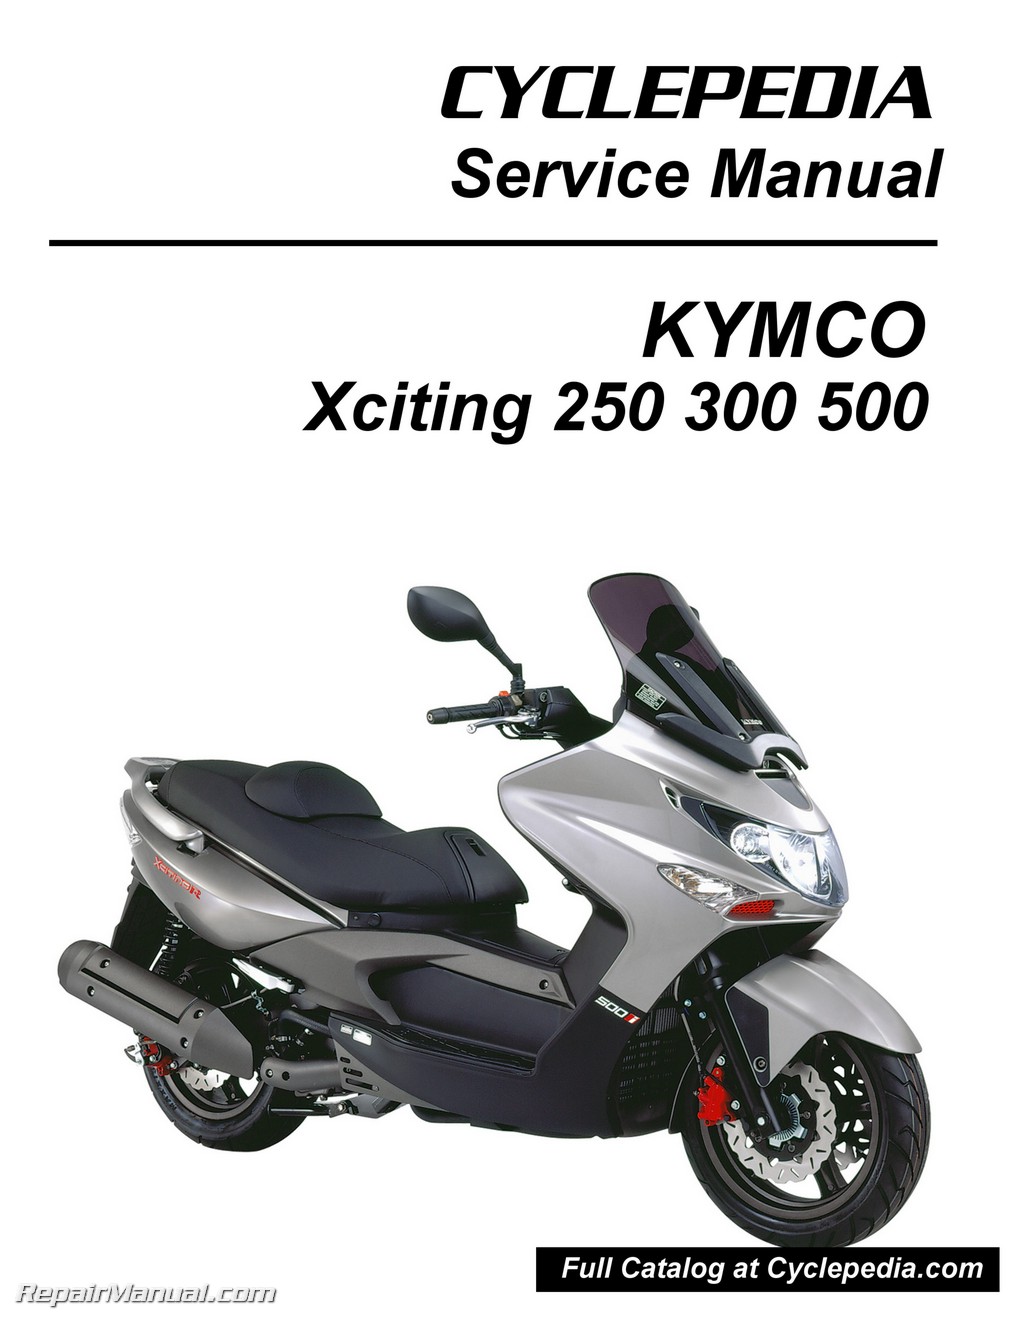 KYMCO Xciting 250 300 500 Ri Scooter Service Manual ...